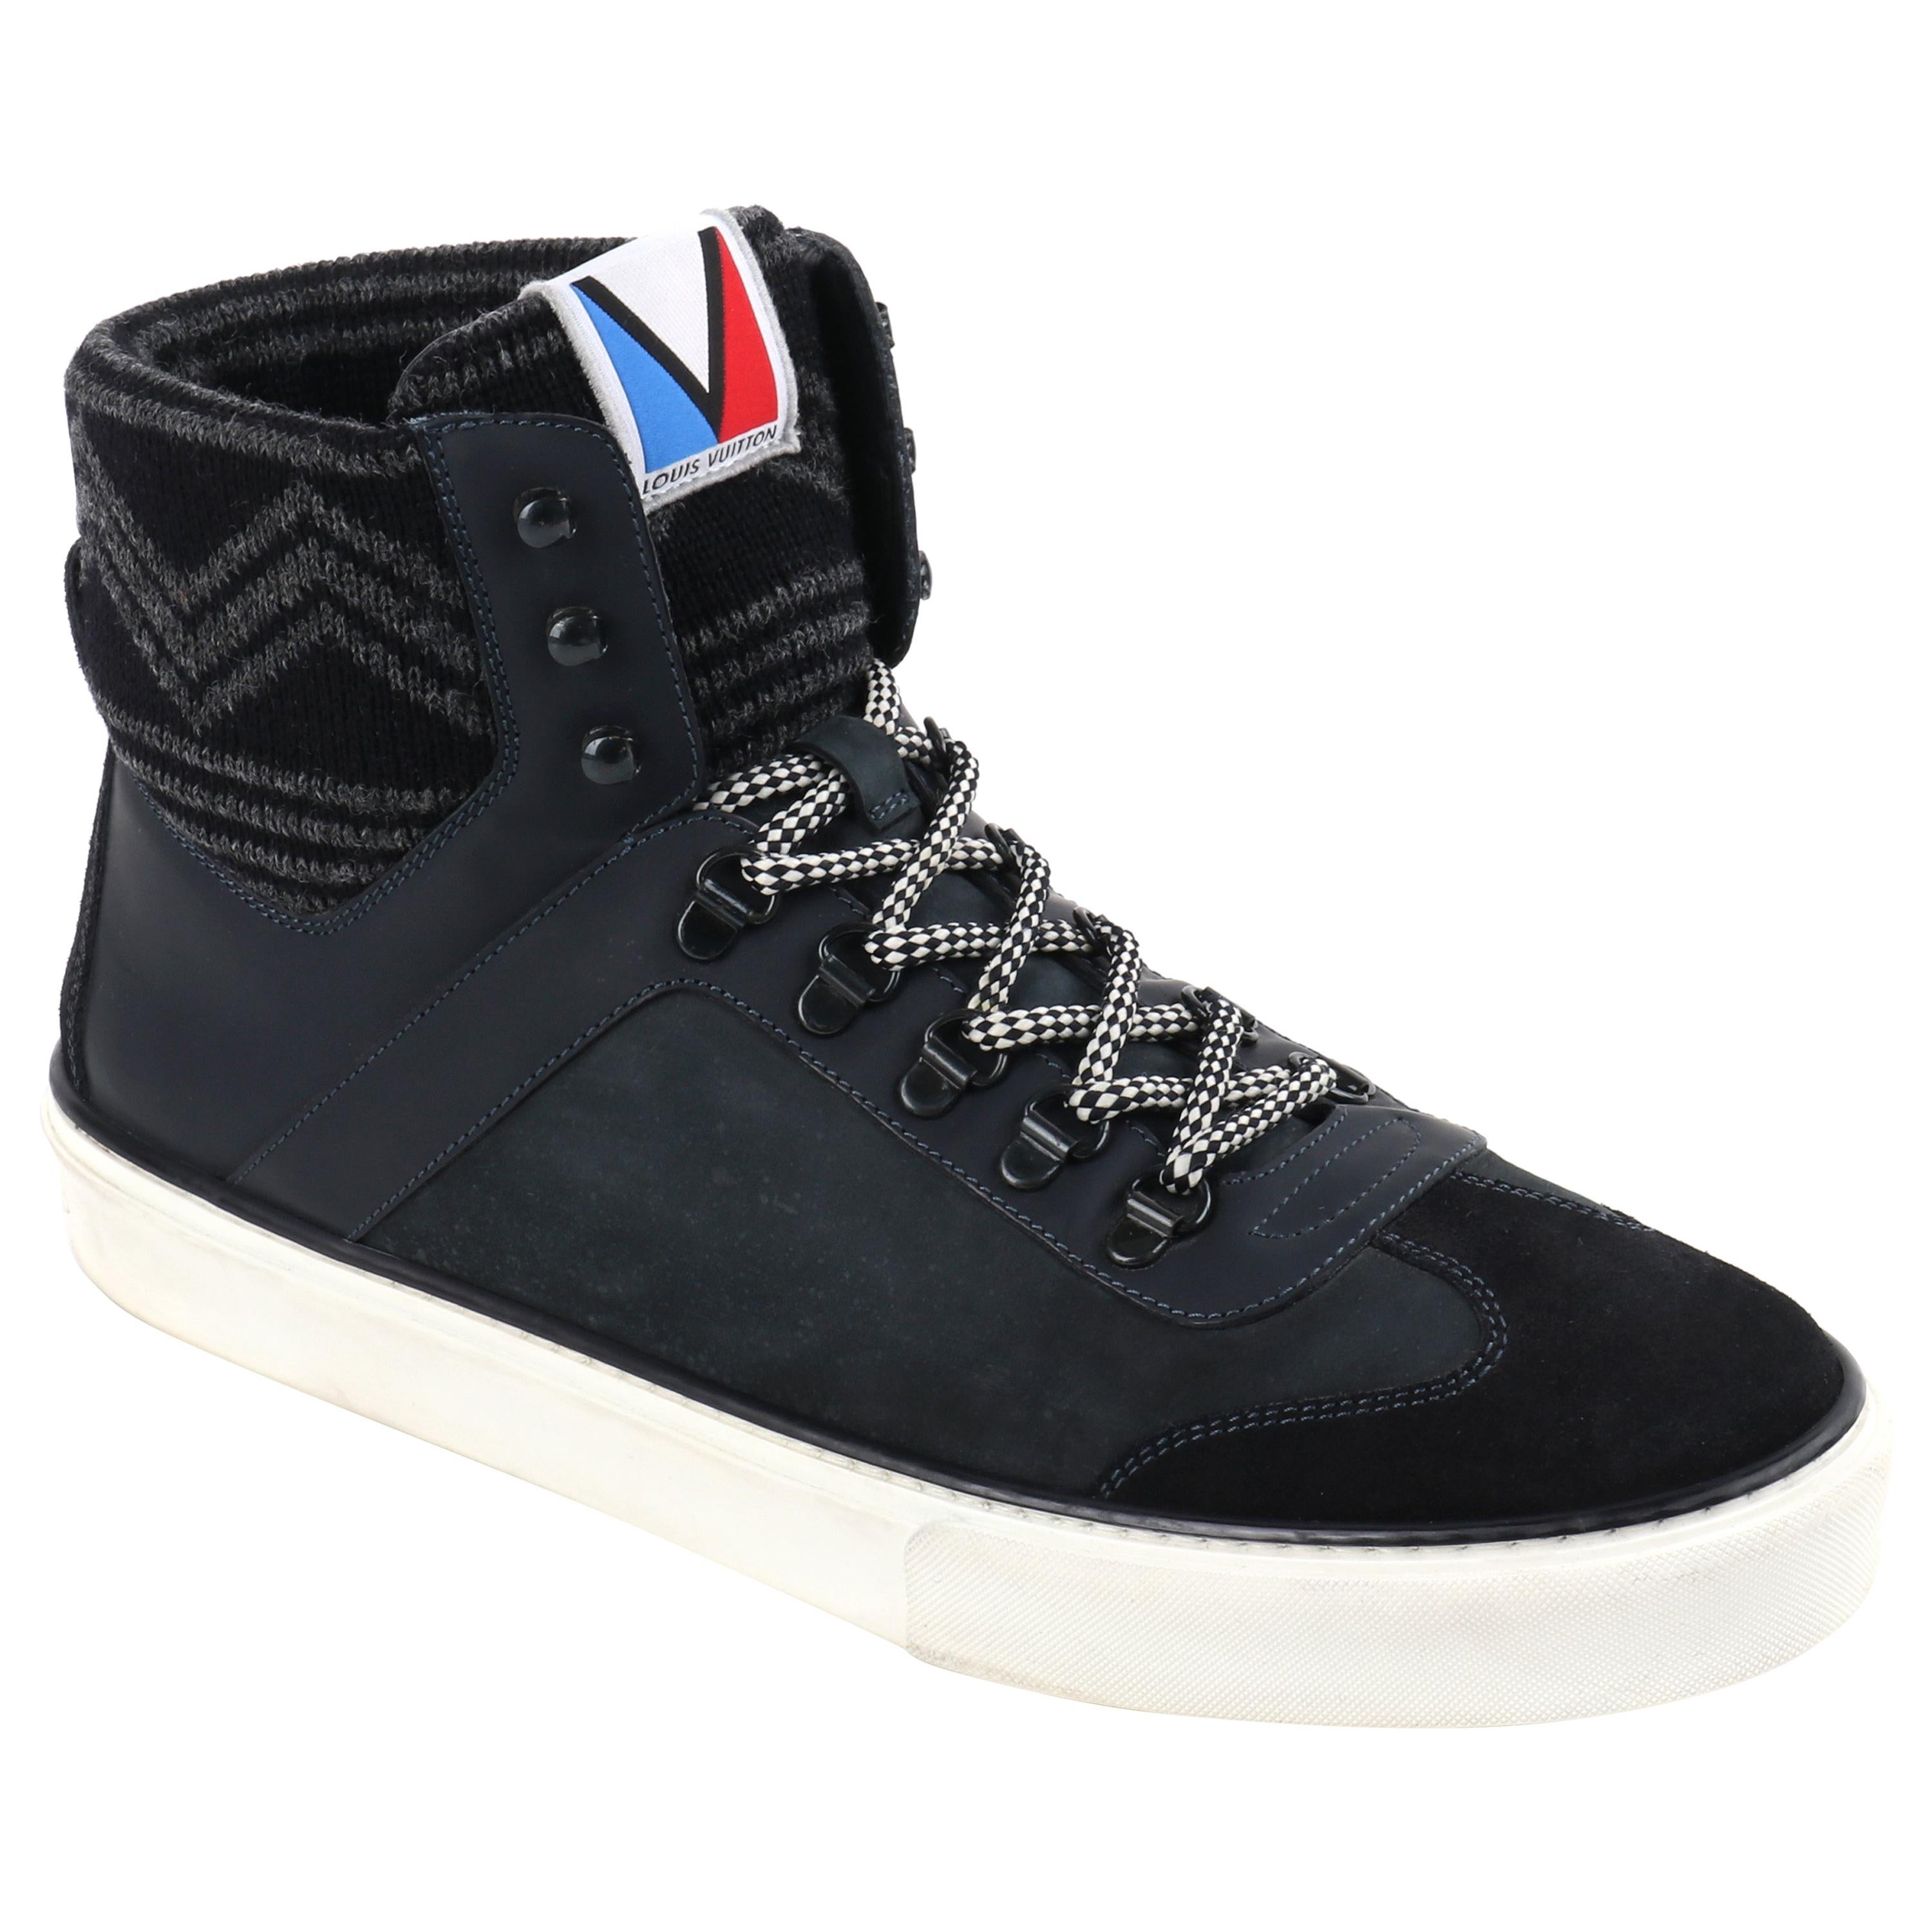 LOUIS VUITTON F/W 2012 "Breaking Away" LV Cup Leather Mountaineer Sneaker Boots